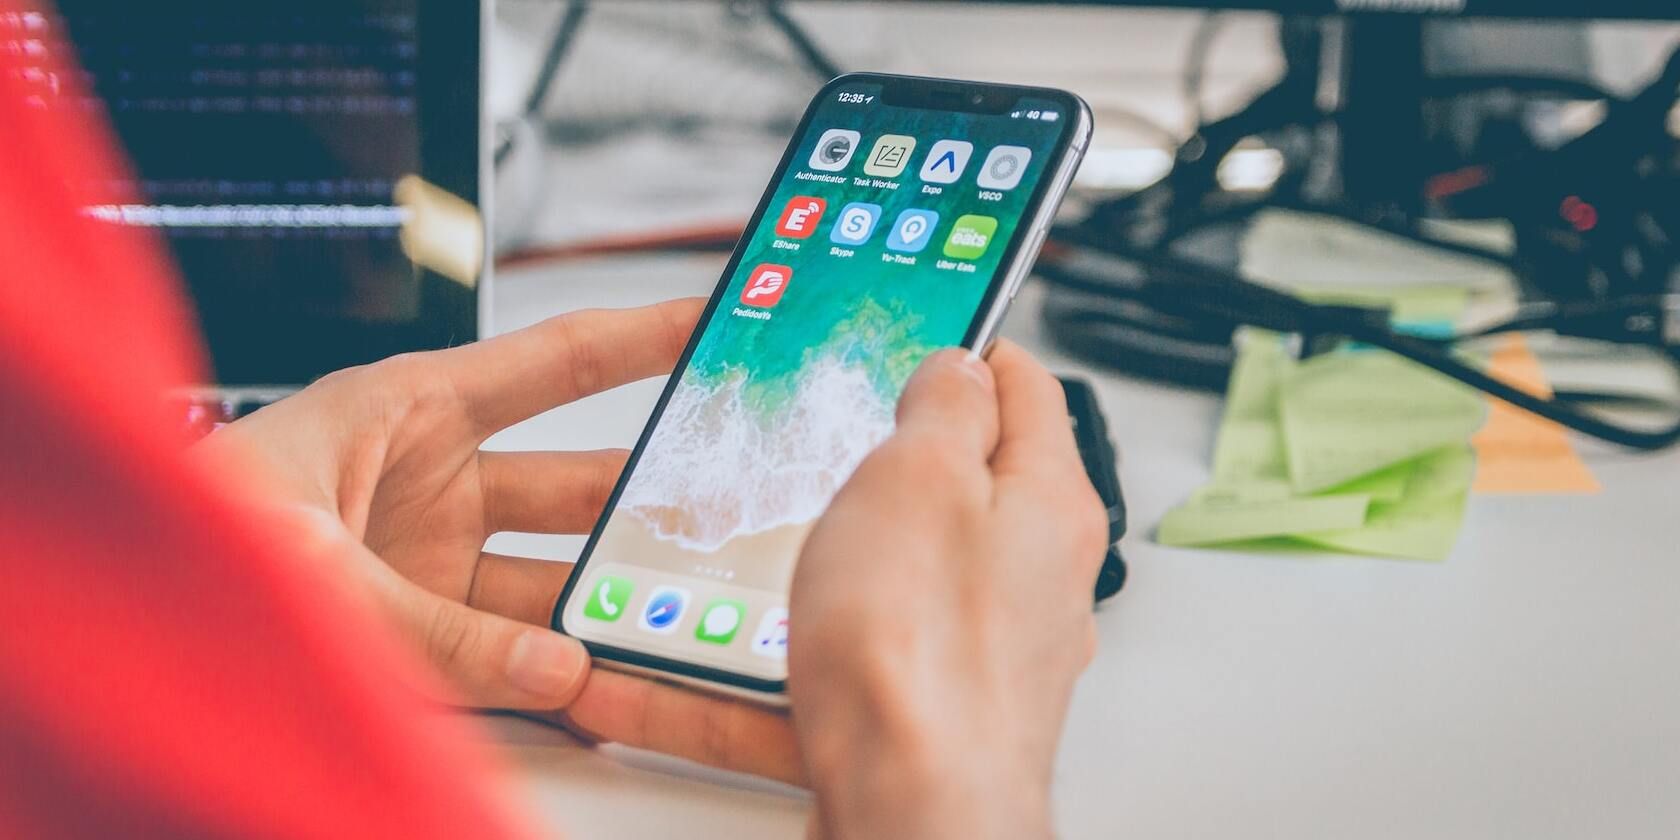 Image of a person looking at an iPhone